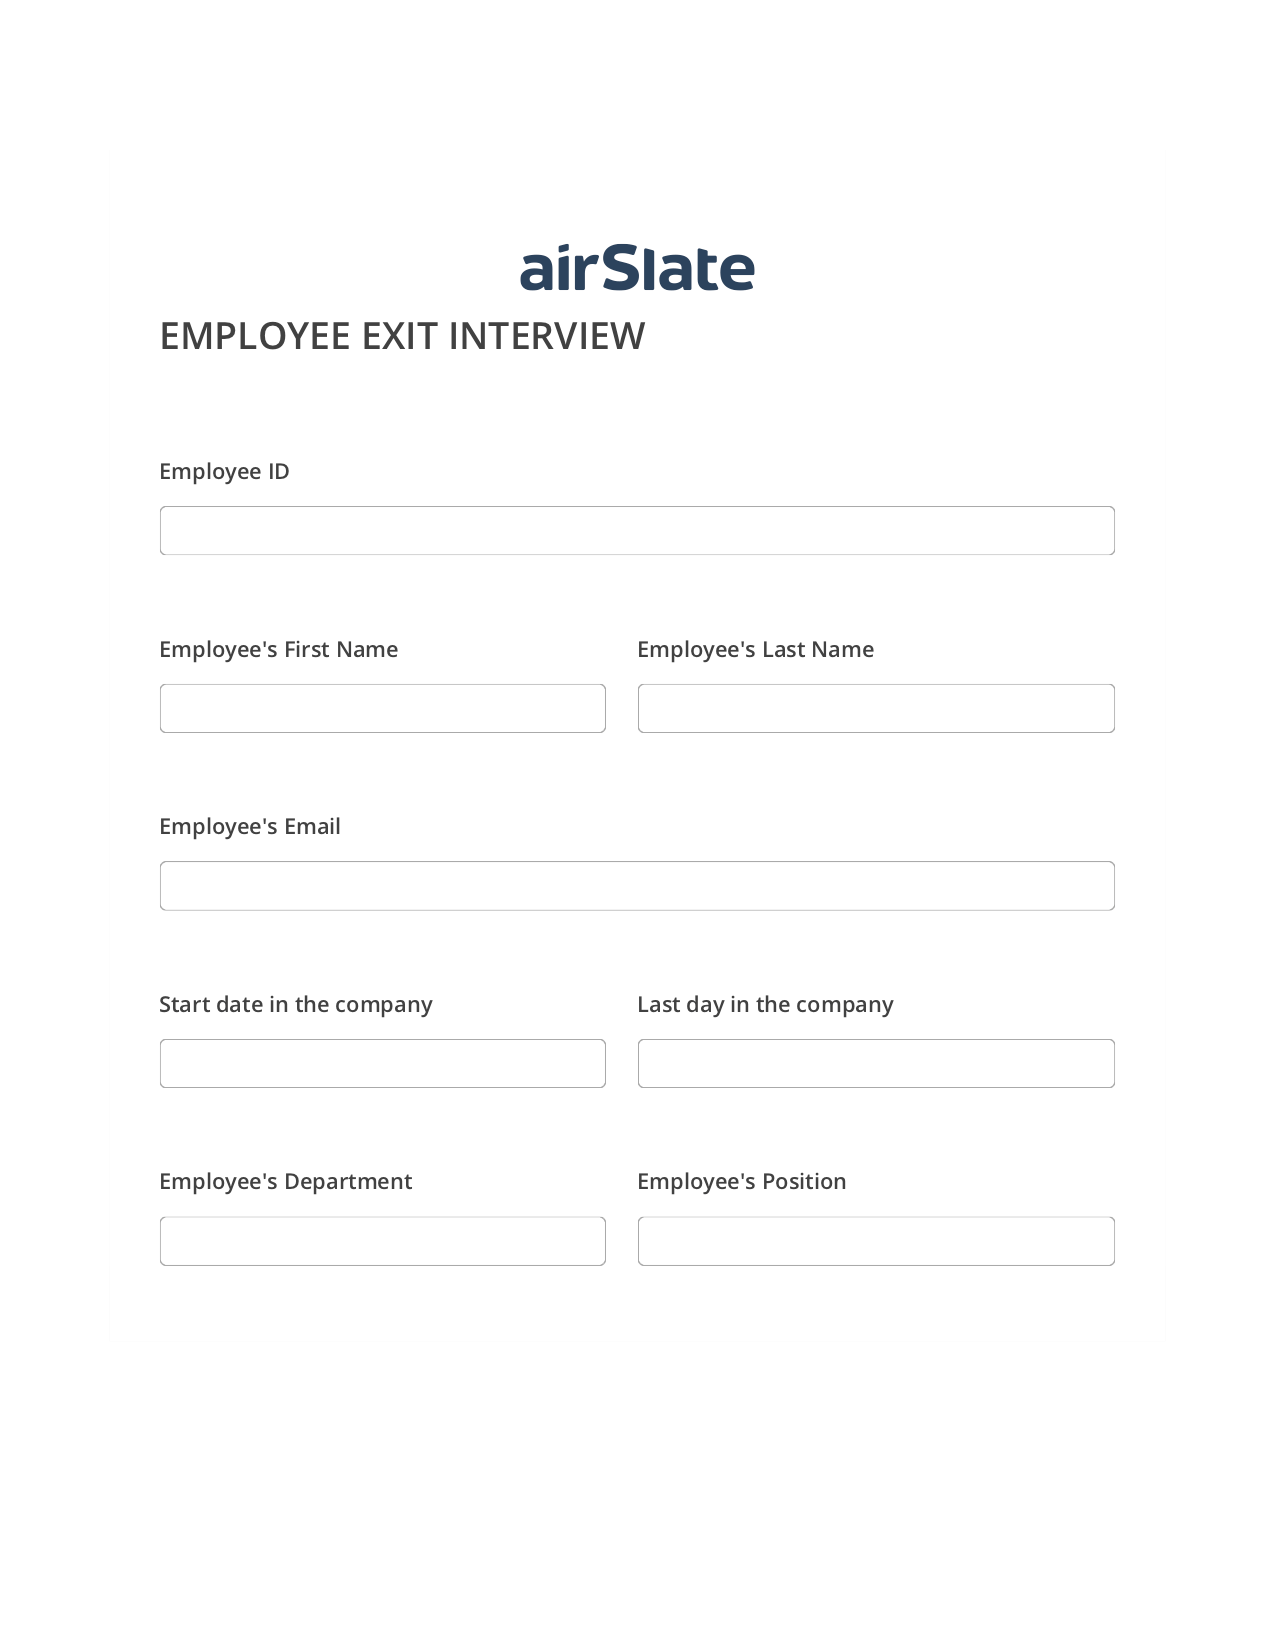 Employee Exit Interview Flow Pre-fill from Google Sheet Dropdown Options Bot